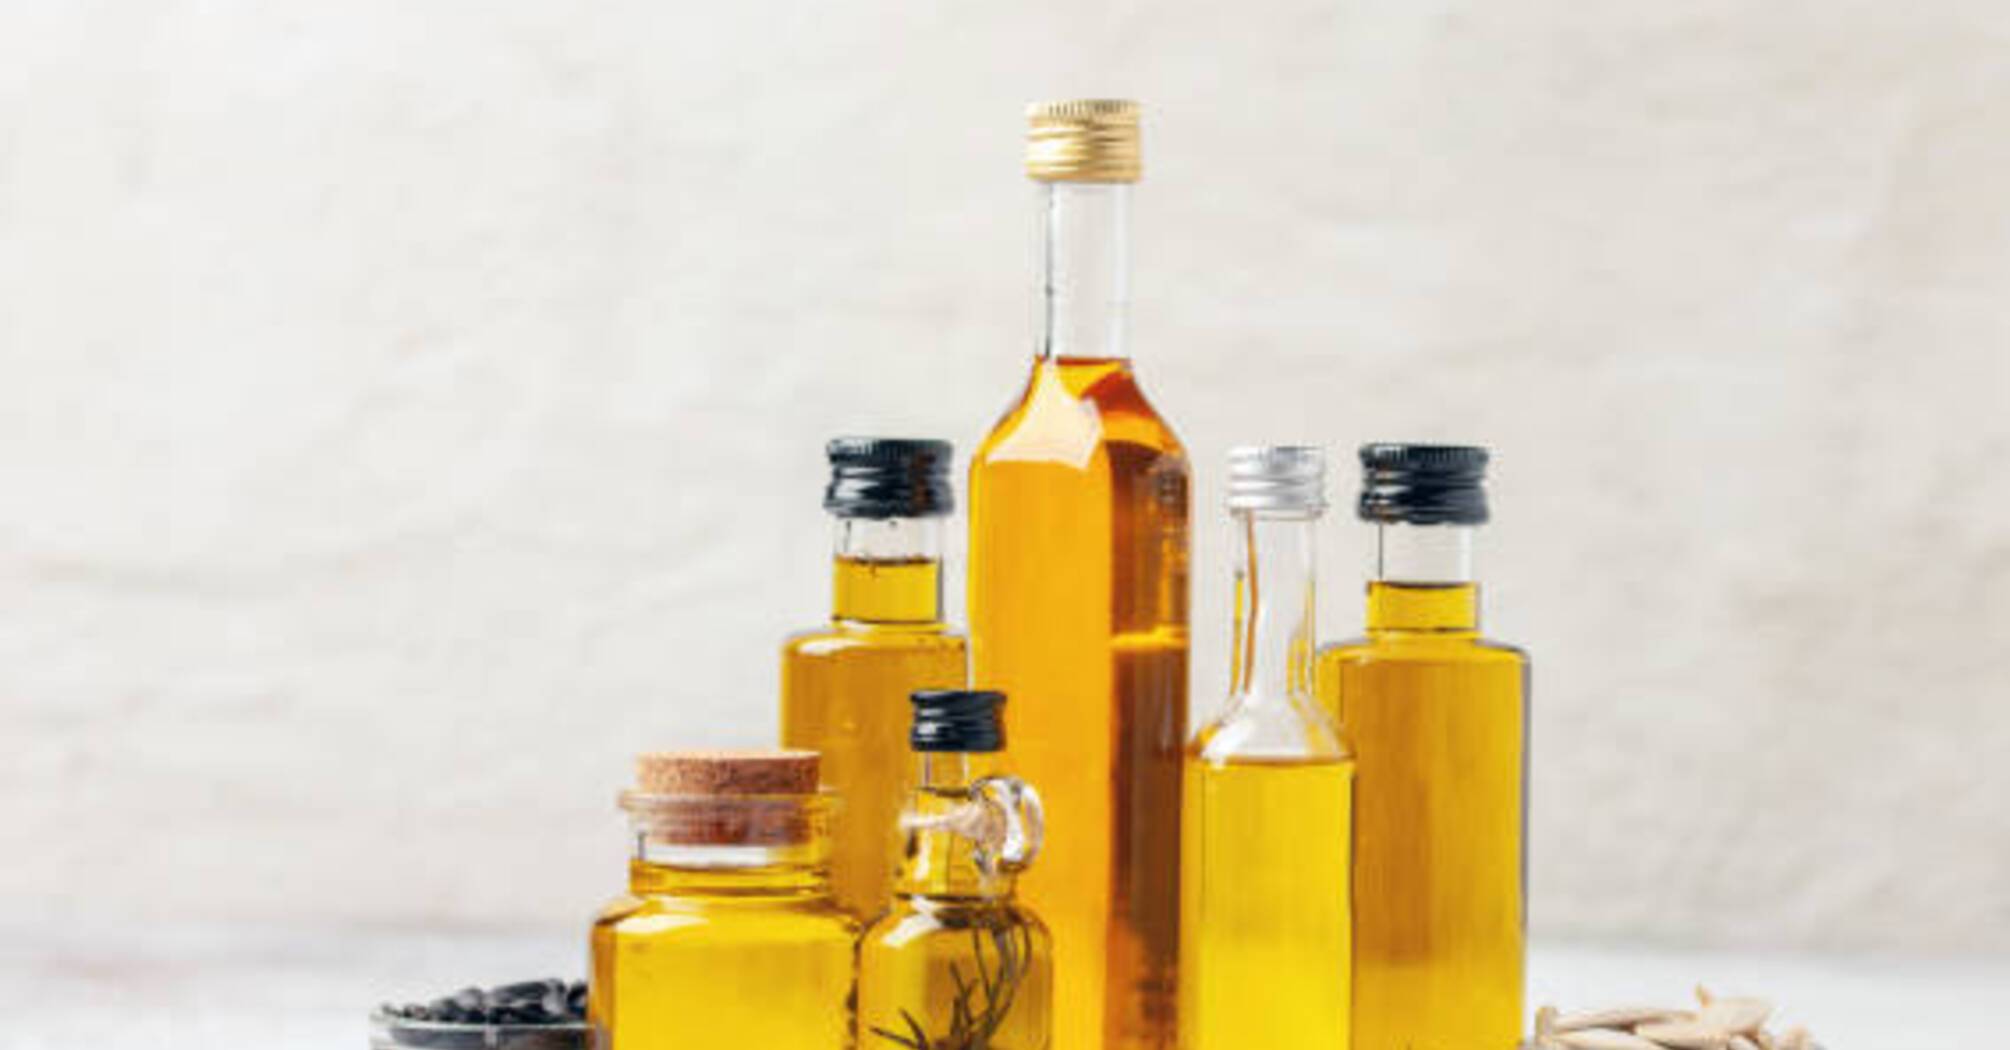 How to use sunflower oil in everyday life: 3 interesting life hacks